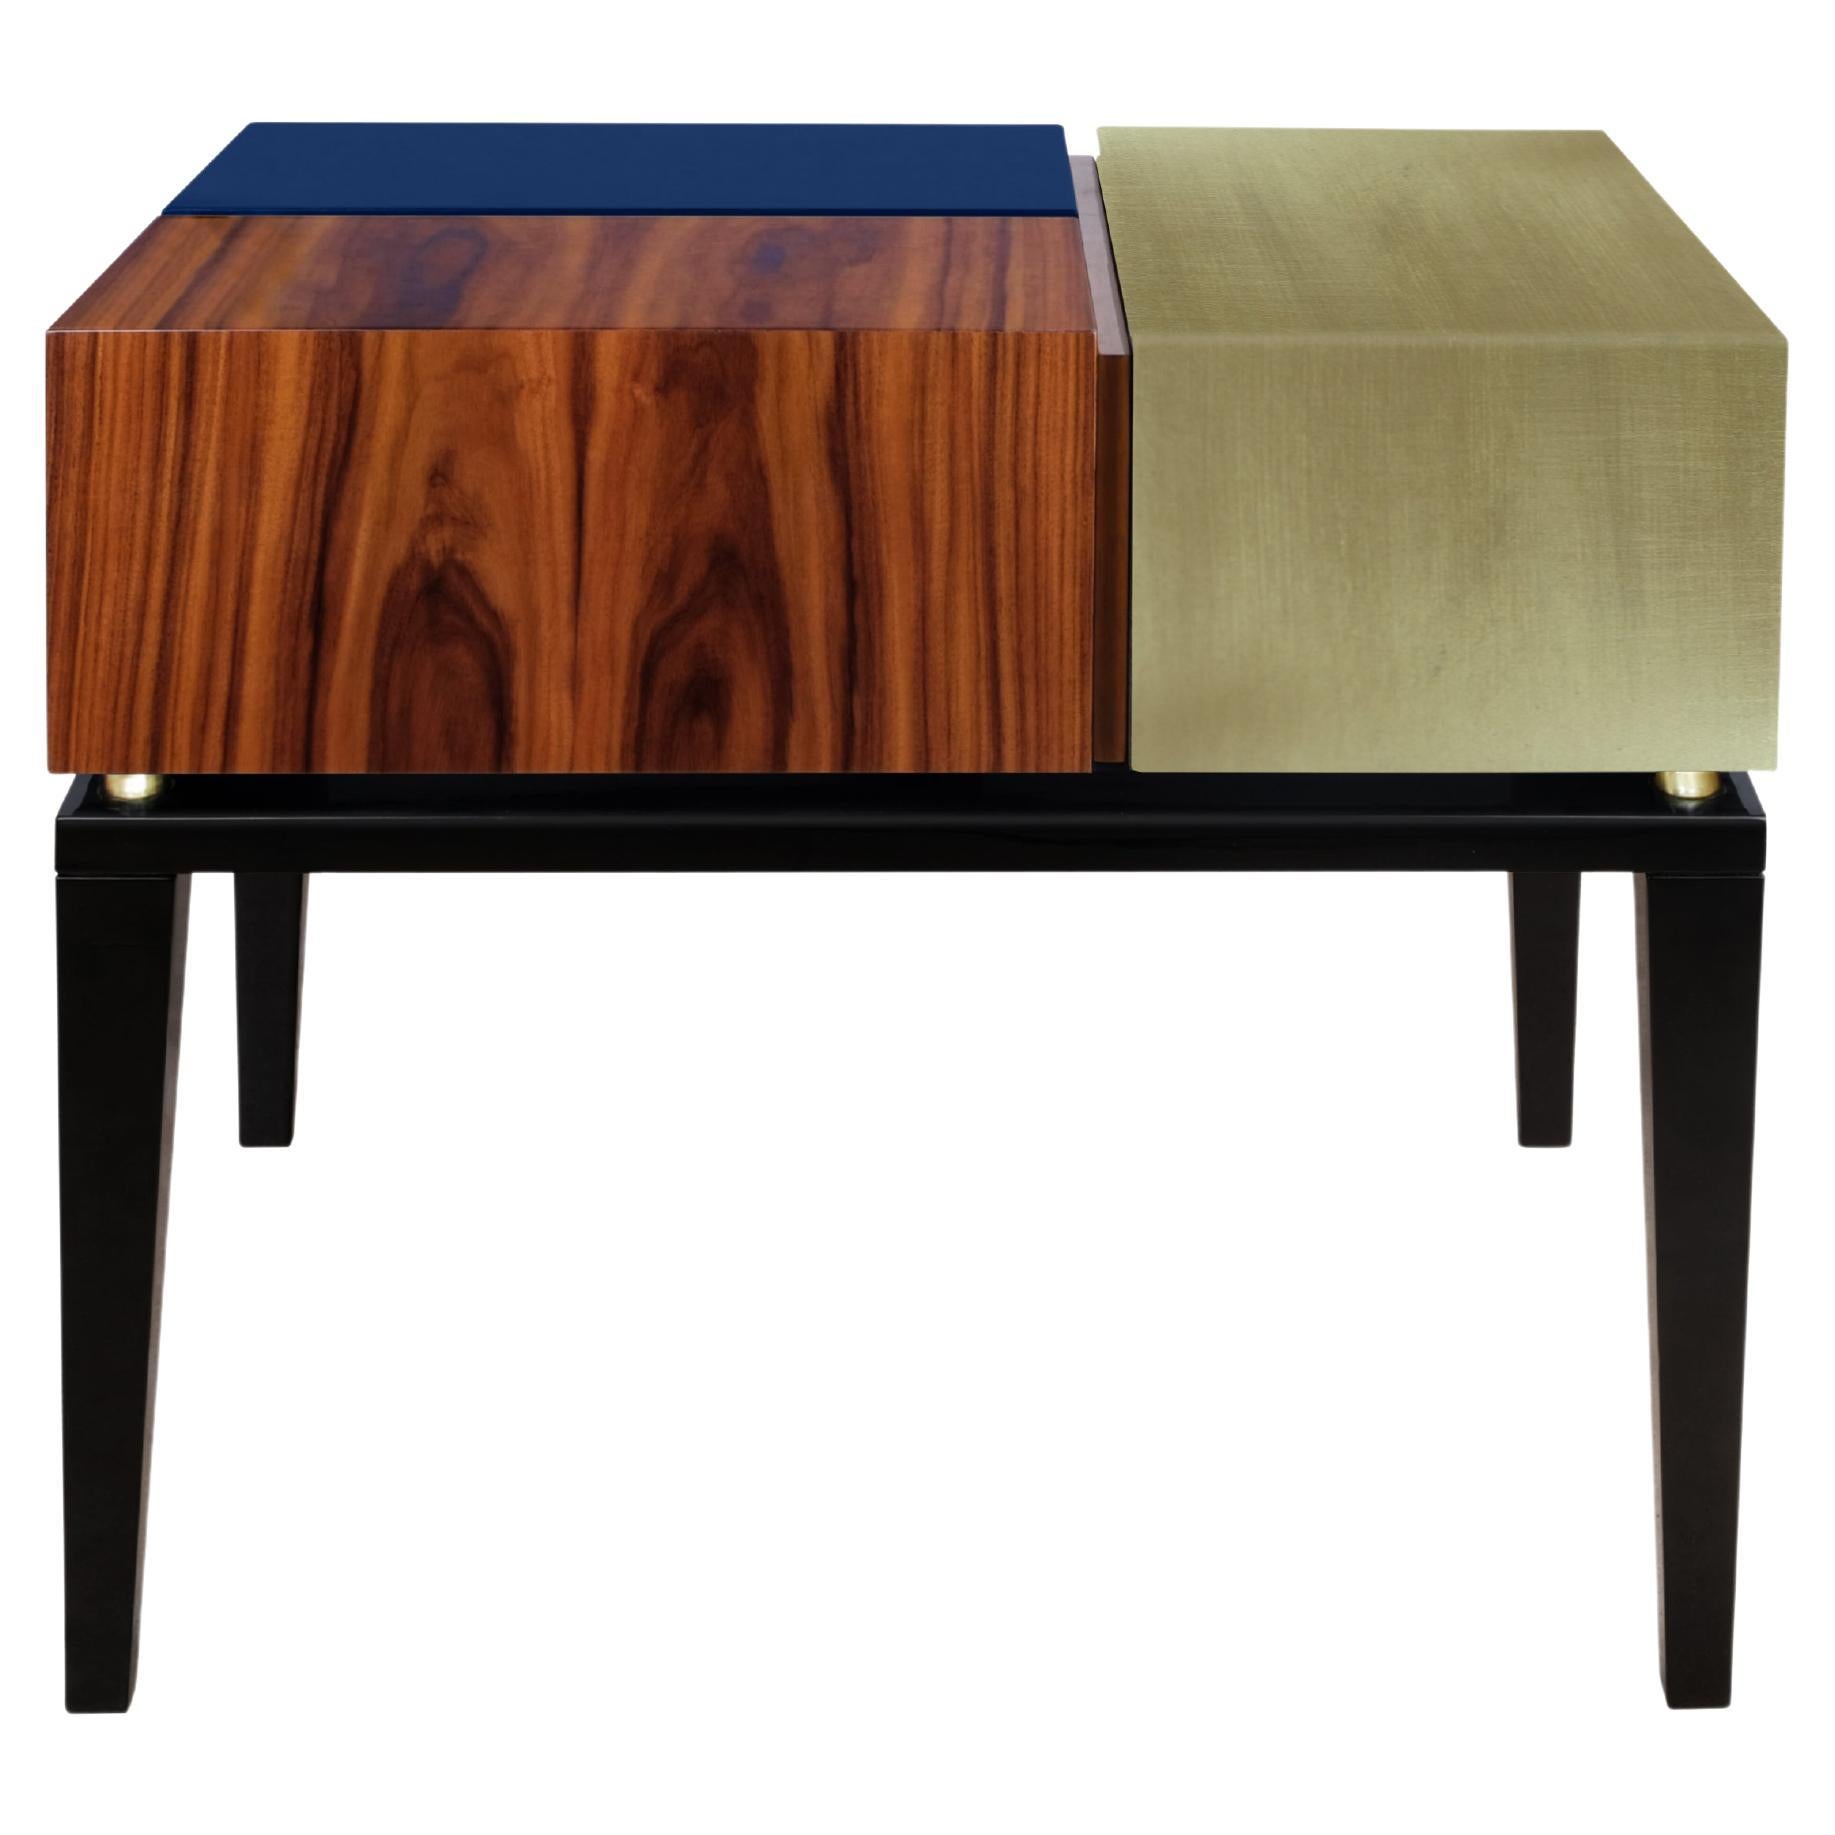 21st Proportion Bedside Table Lacquered Wood Gold Leaf by Malabar For Sale